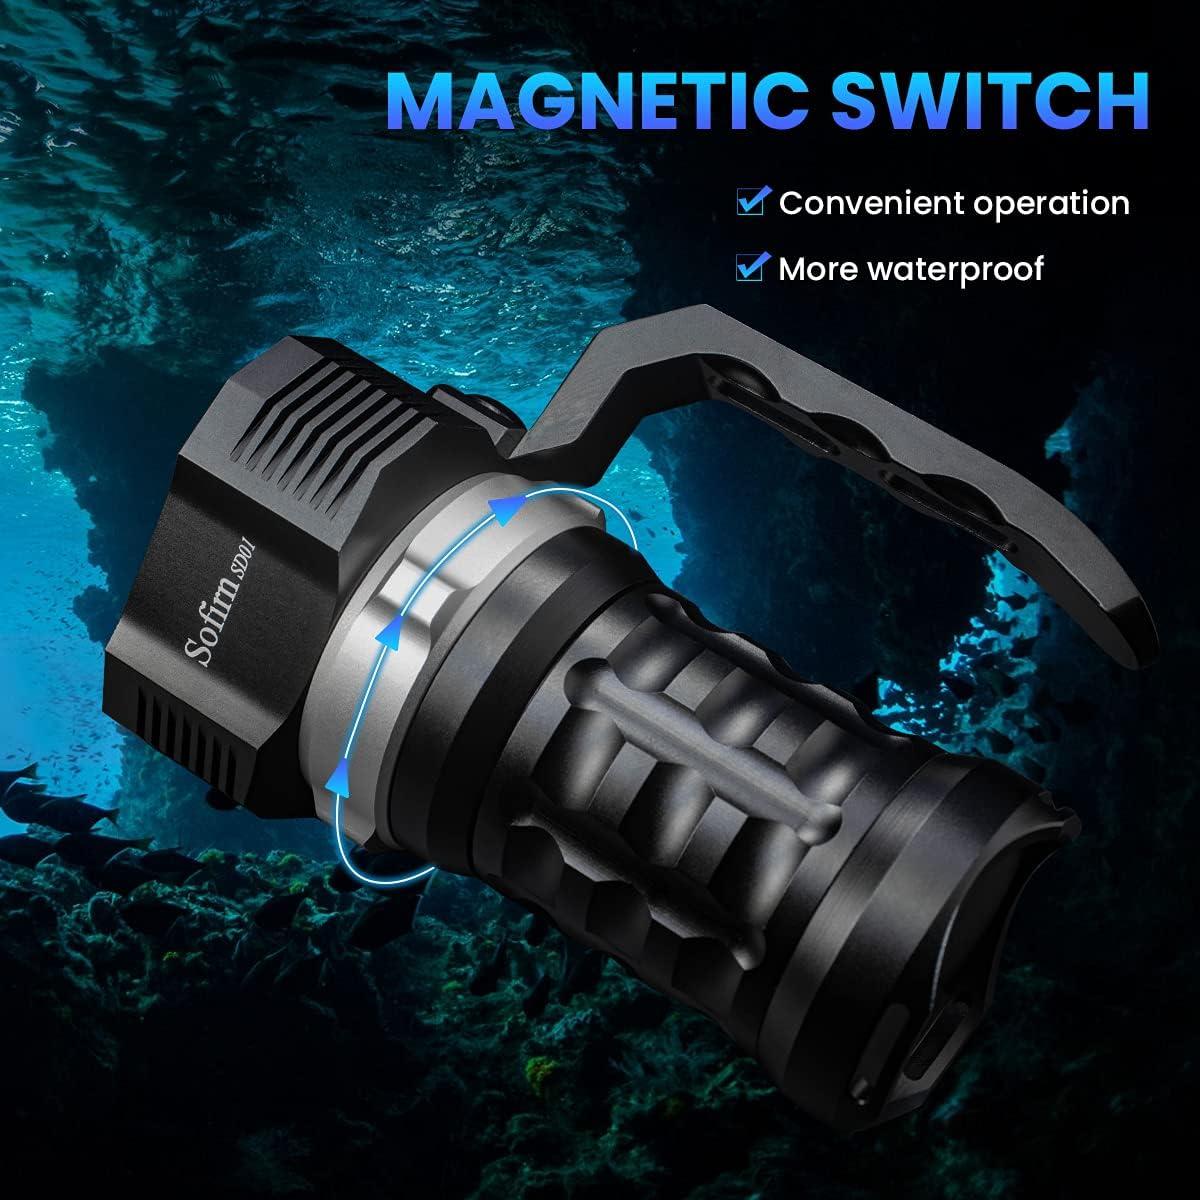 sofirn 6000 Lumen LED Scuba Diving Flashlight, Super Bright 100m Underwater  and Powerful Waterproof Torch with Magnetic Control Switch, 4 Light Modes.  (SD01) SD01-6000LM